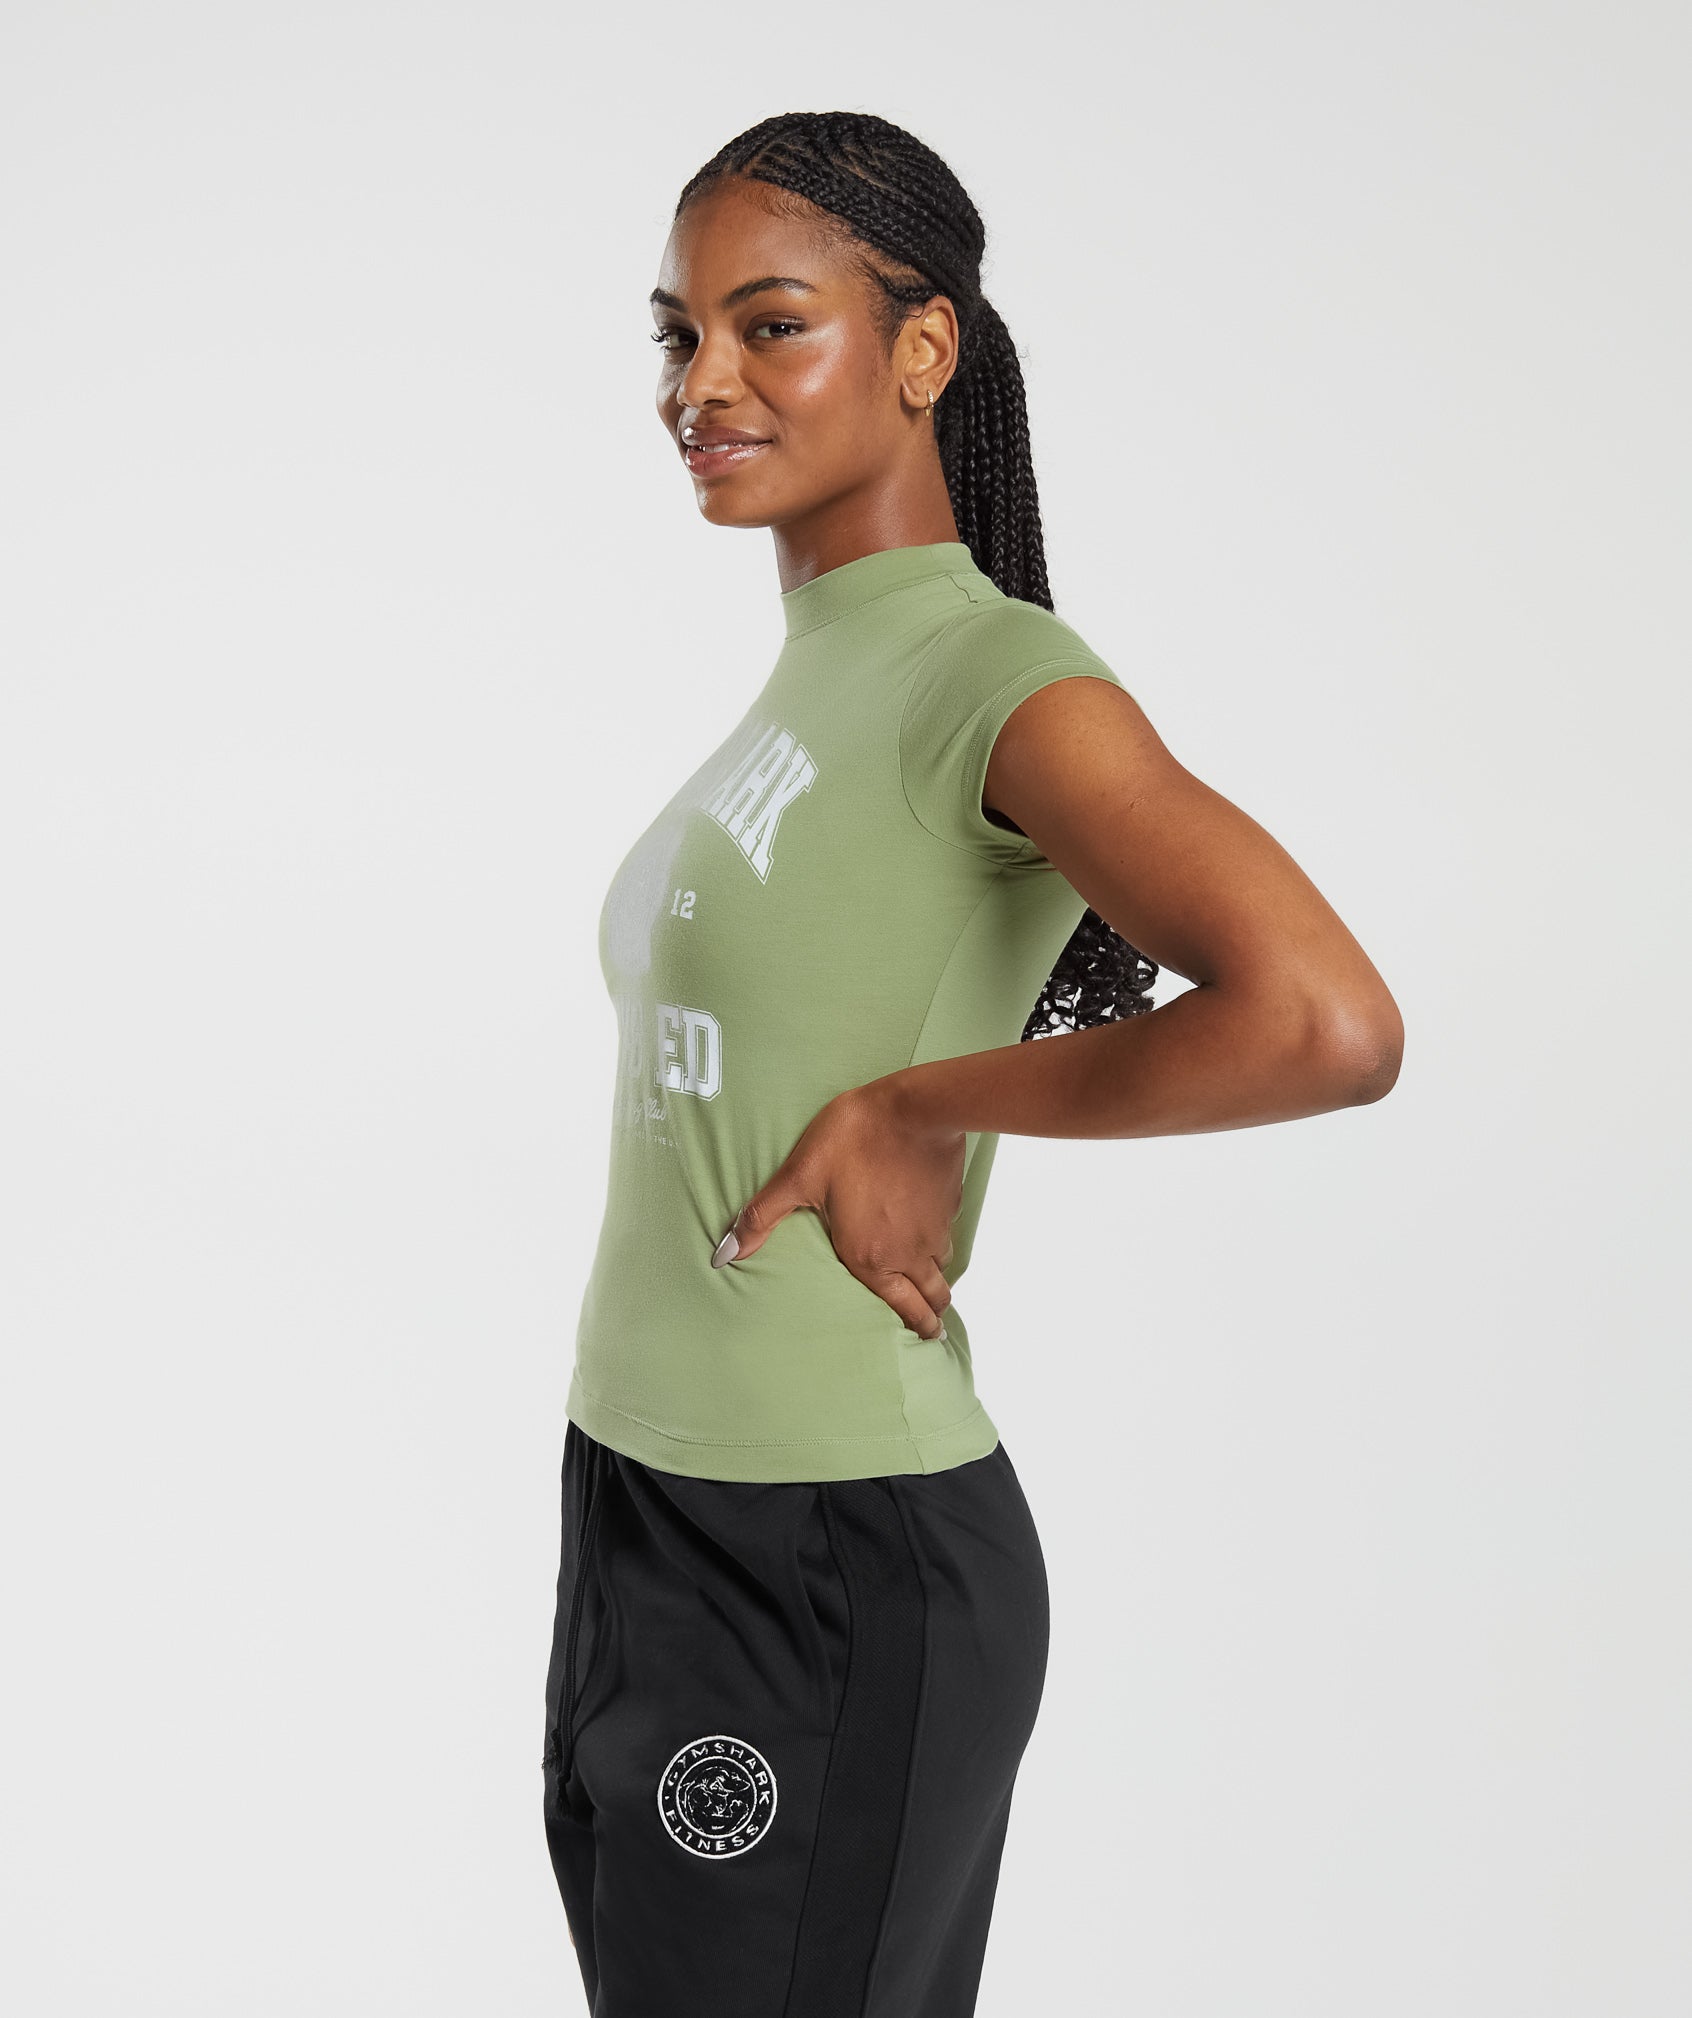 Phys Ed Graphic Body Fit T-Shirt in Light Sage Green - view 3